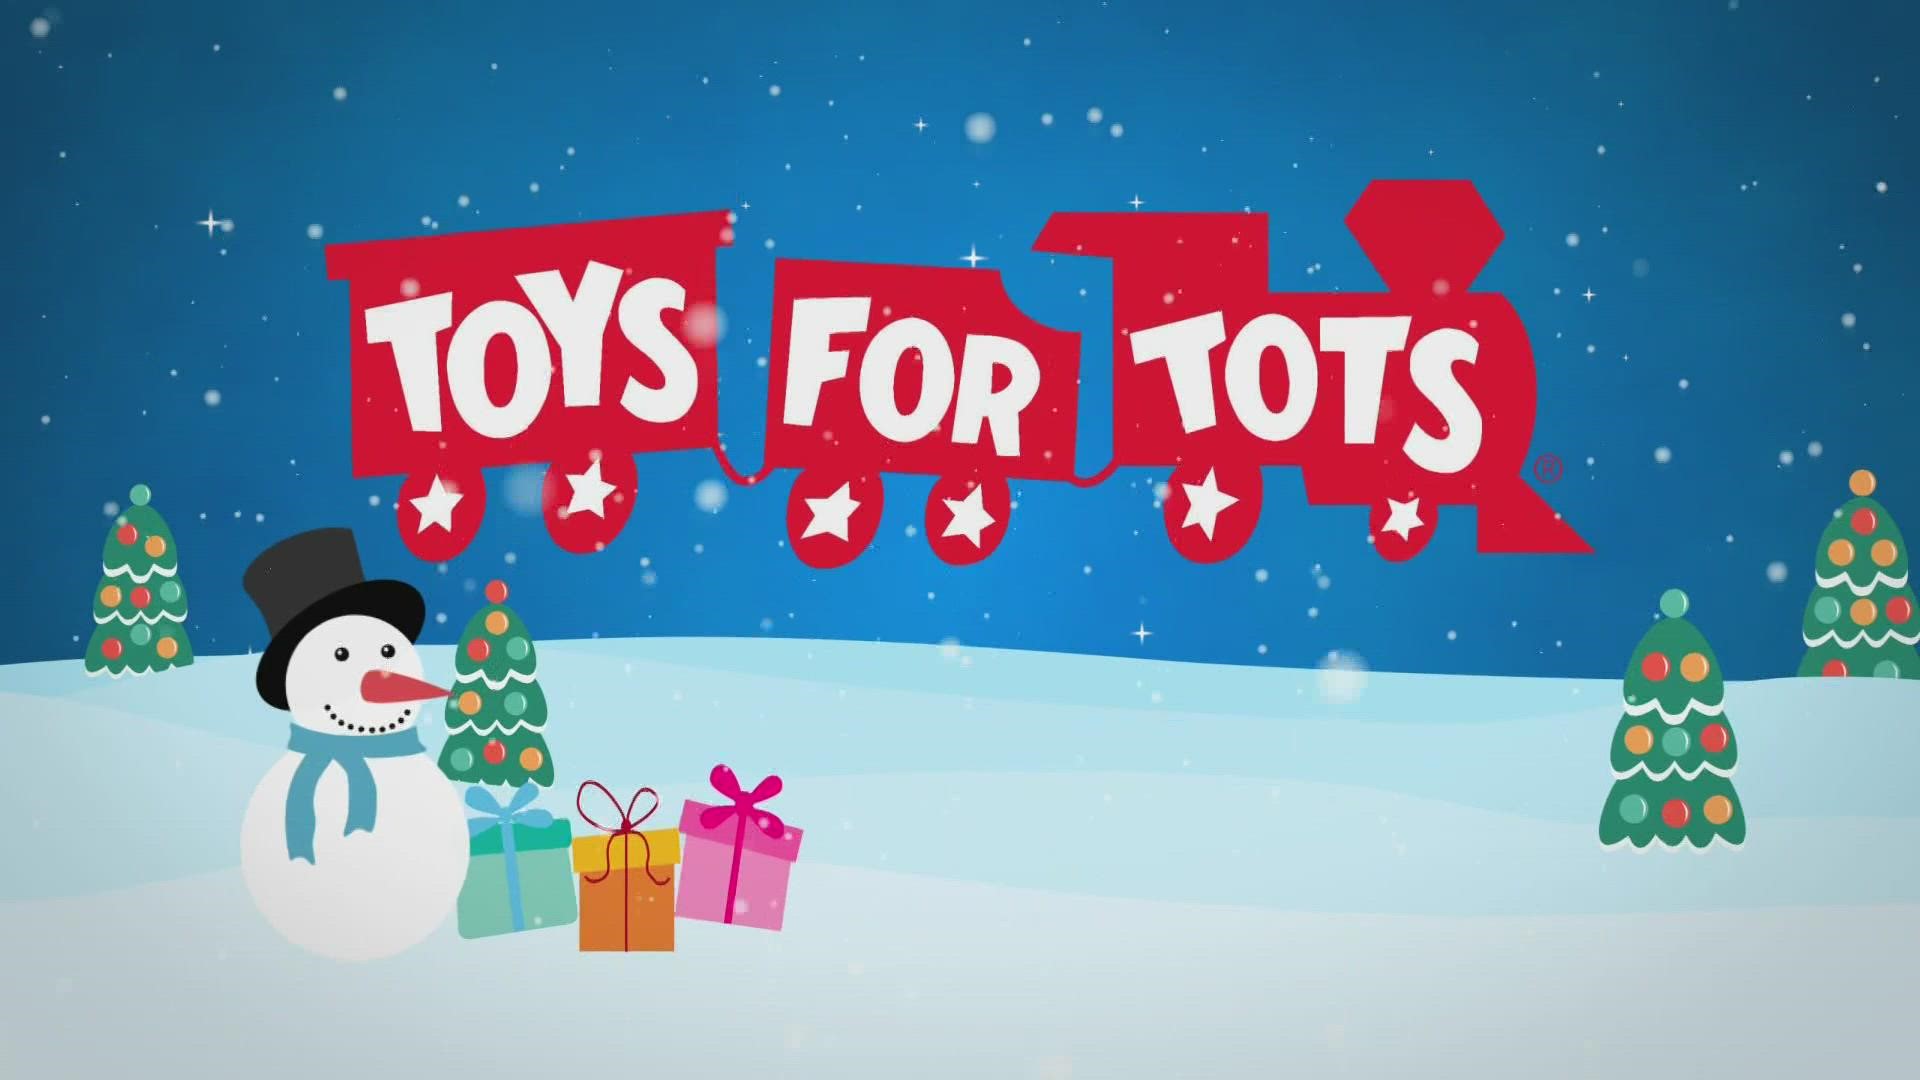 A record number of kids are registered for toys this holiday season. But Toys for Tots needs your help to make sure children have gifts to open Christmas morning.